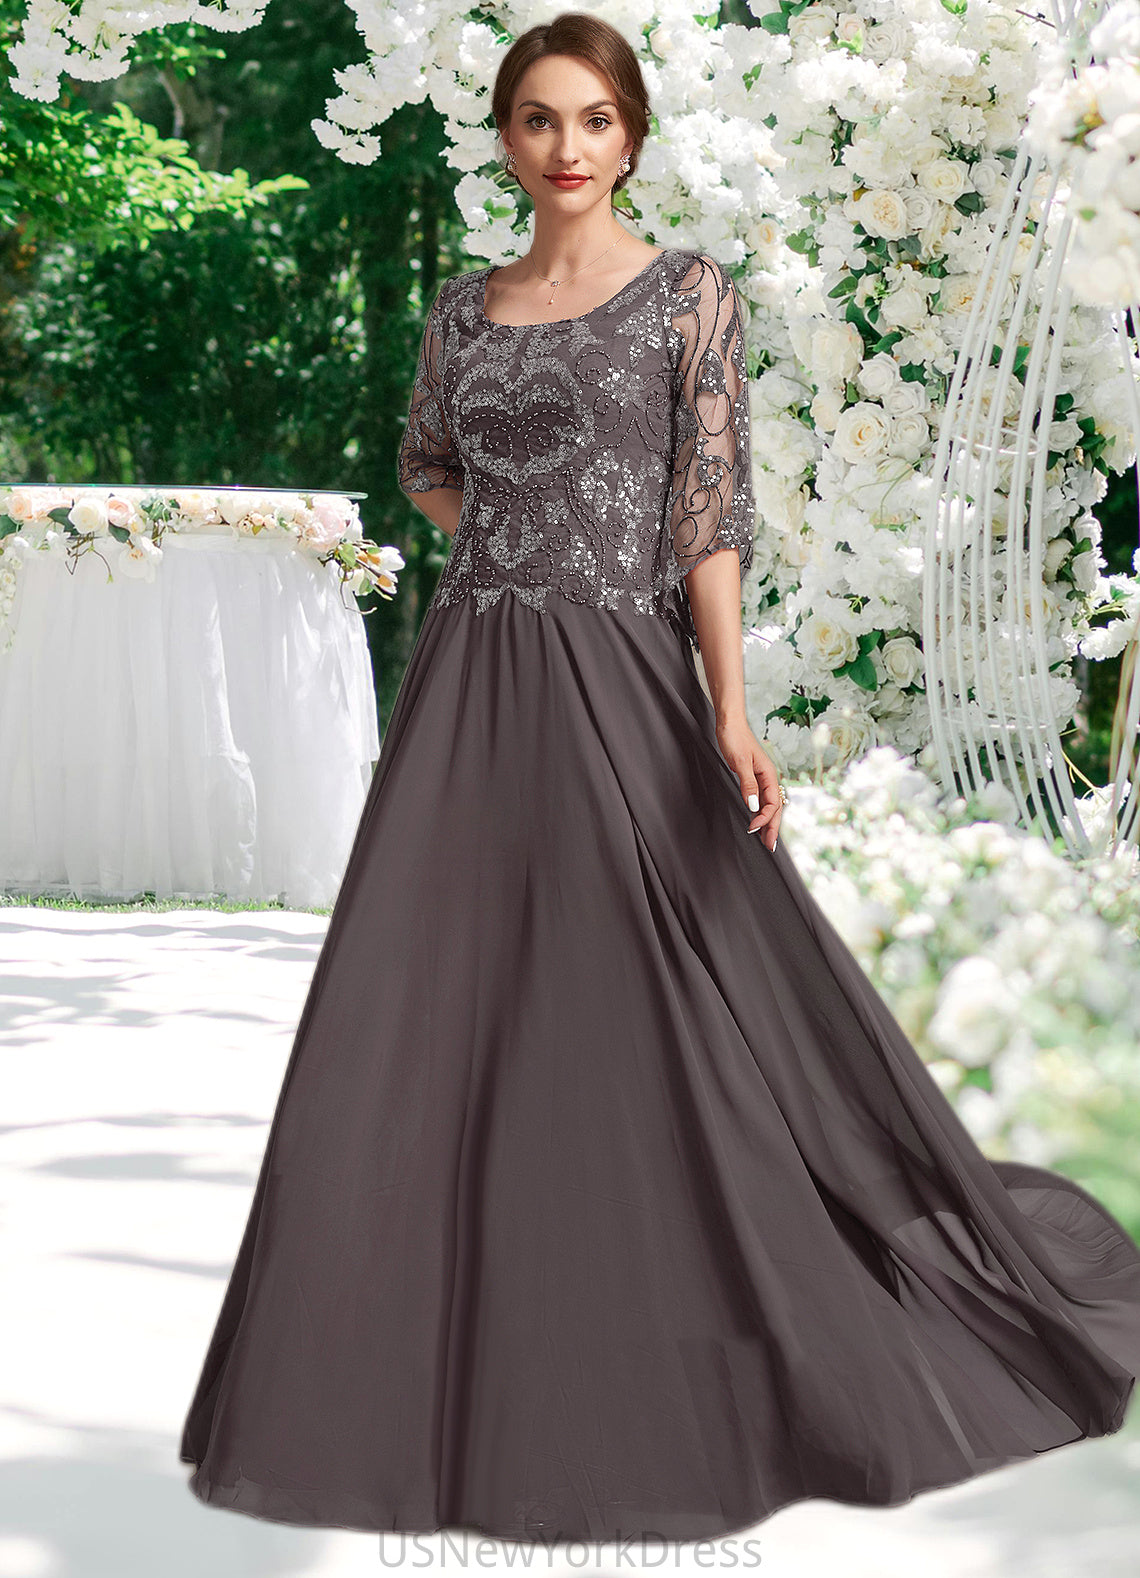 Jaycee A-Line Scoop Neck Floor-Length Chiffon Lace Mother of the Bride Dress With Beading Sequins DJ126P0015036